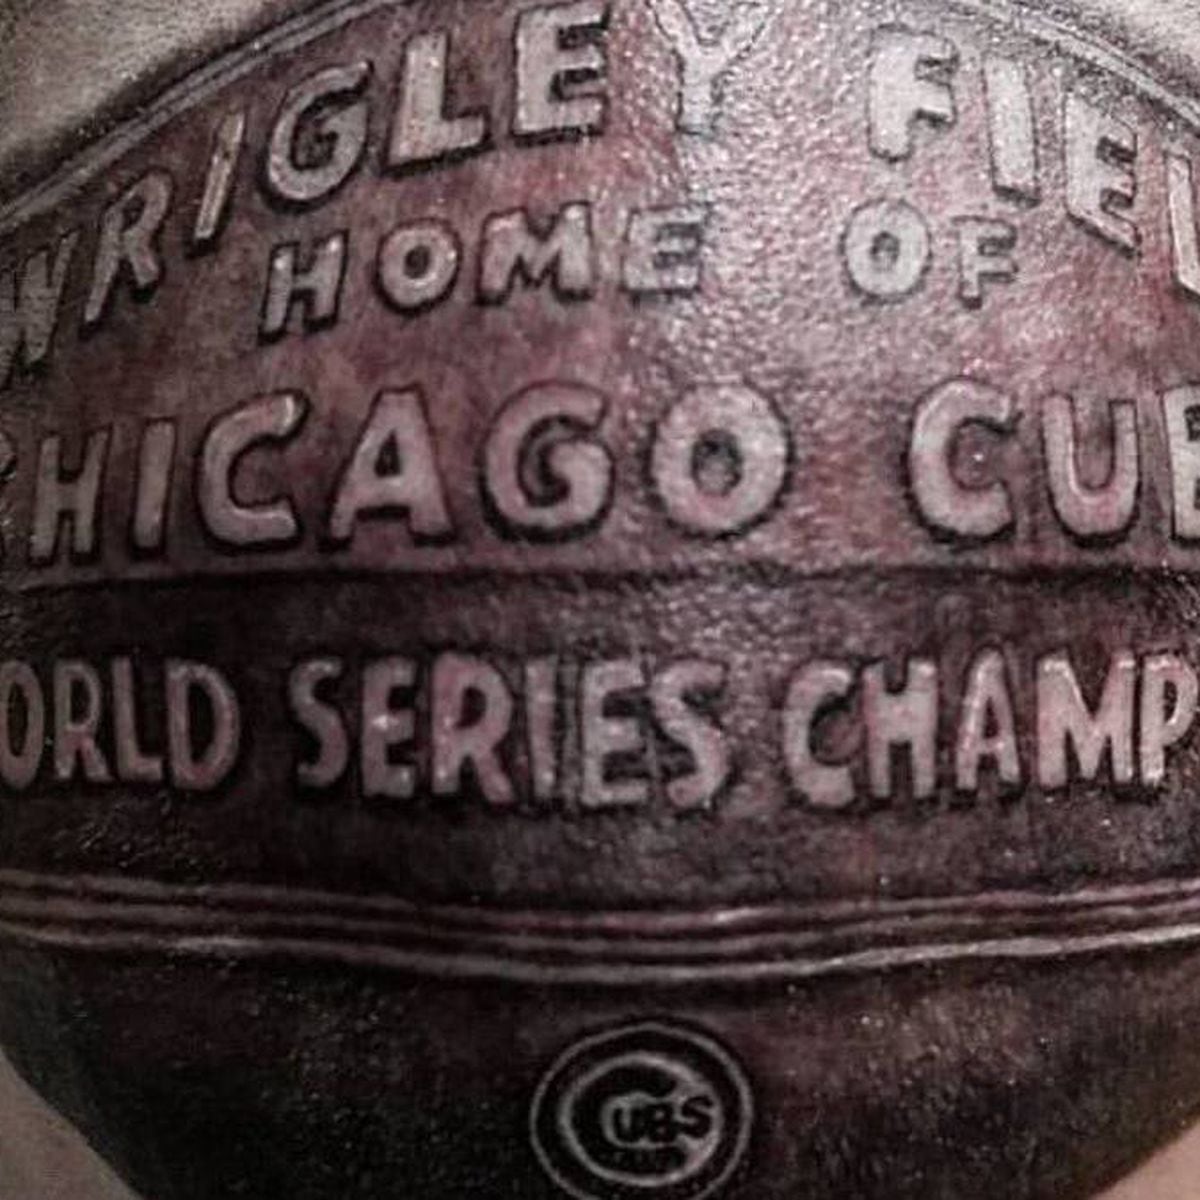 This is the most insane Cubs World Series tattoo you'll see